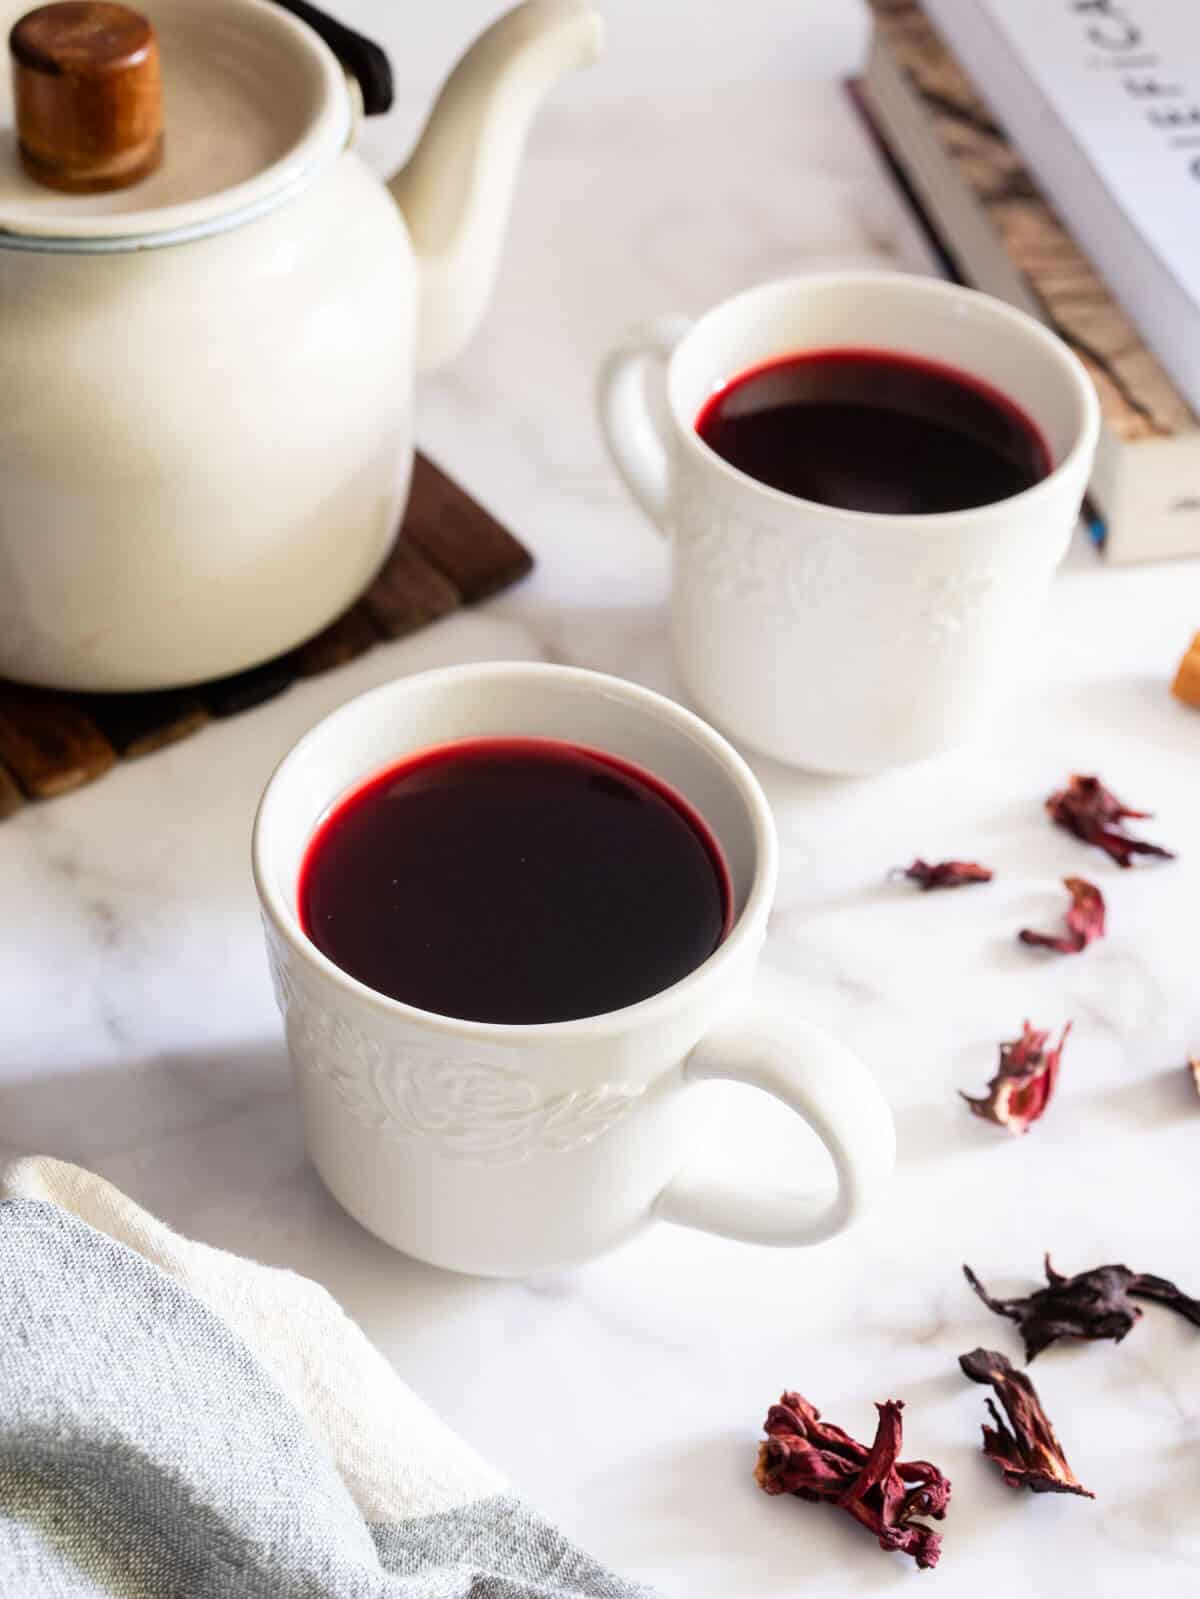 served hibiscus tea in white cups, next to an old kettle.